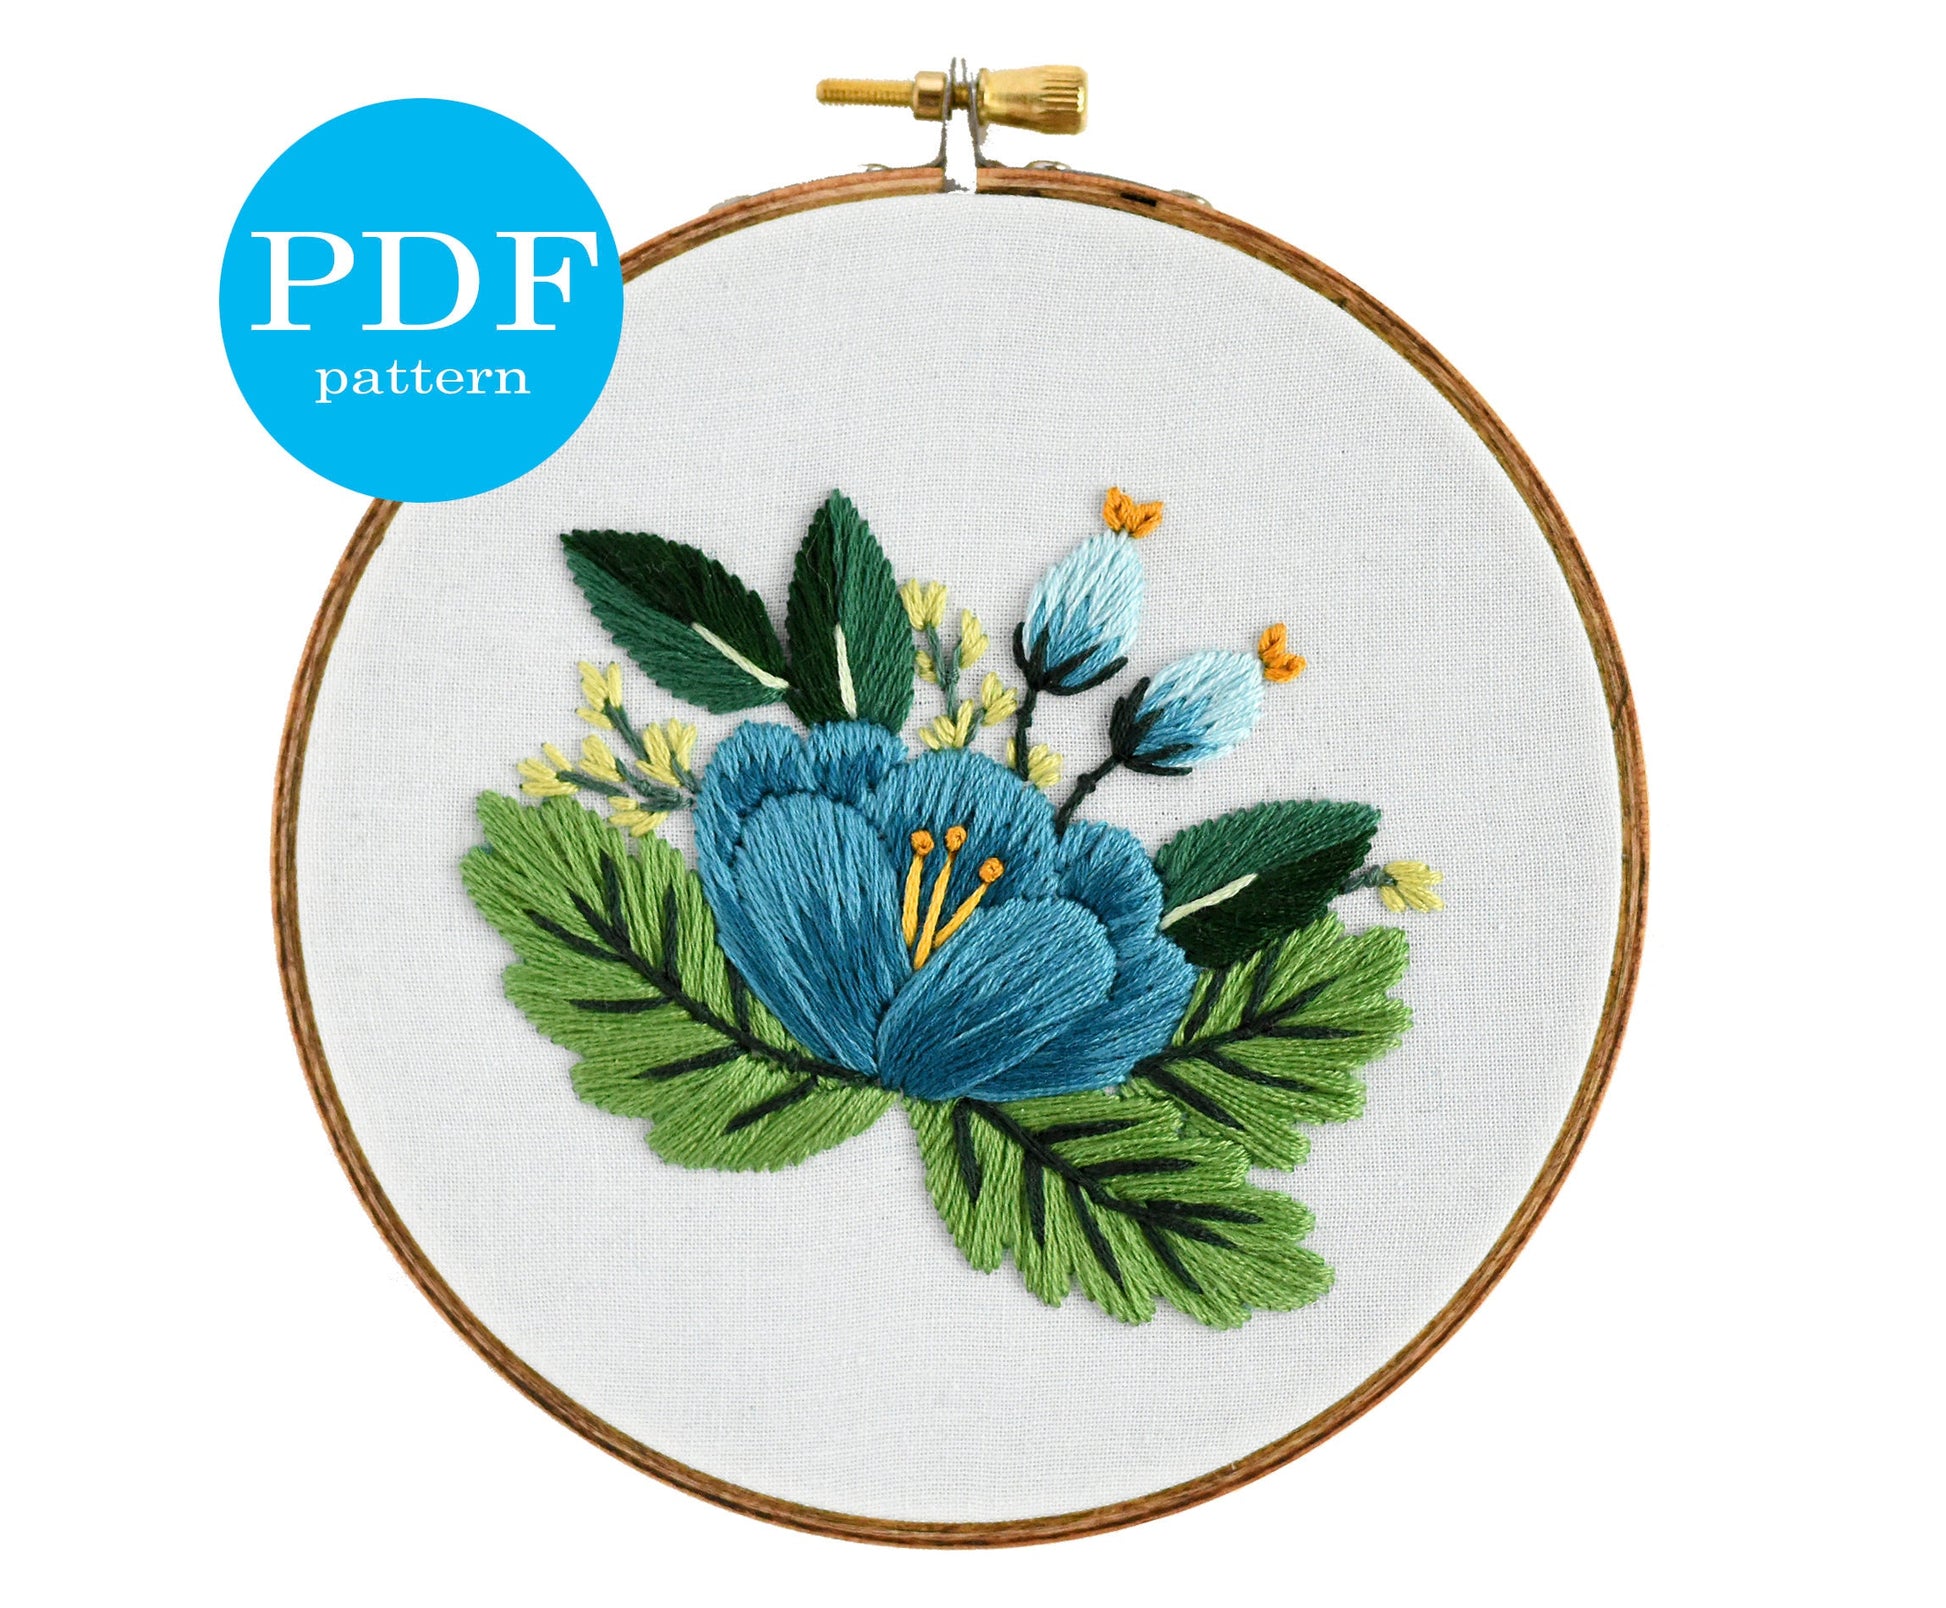 Flower Embroidery Pattern, Colorful Floral Embroidery Tutorial, DIY Instant  Download PDF, Hand Embroidery Pattern, Hand Embroidered Flowers -   Canada